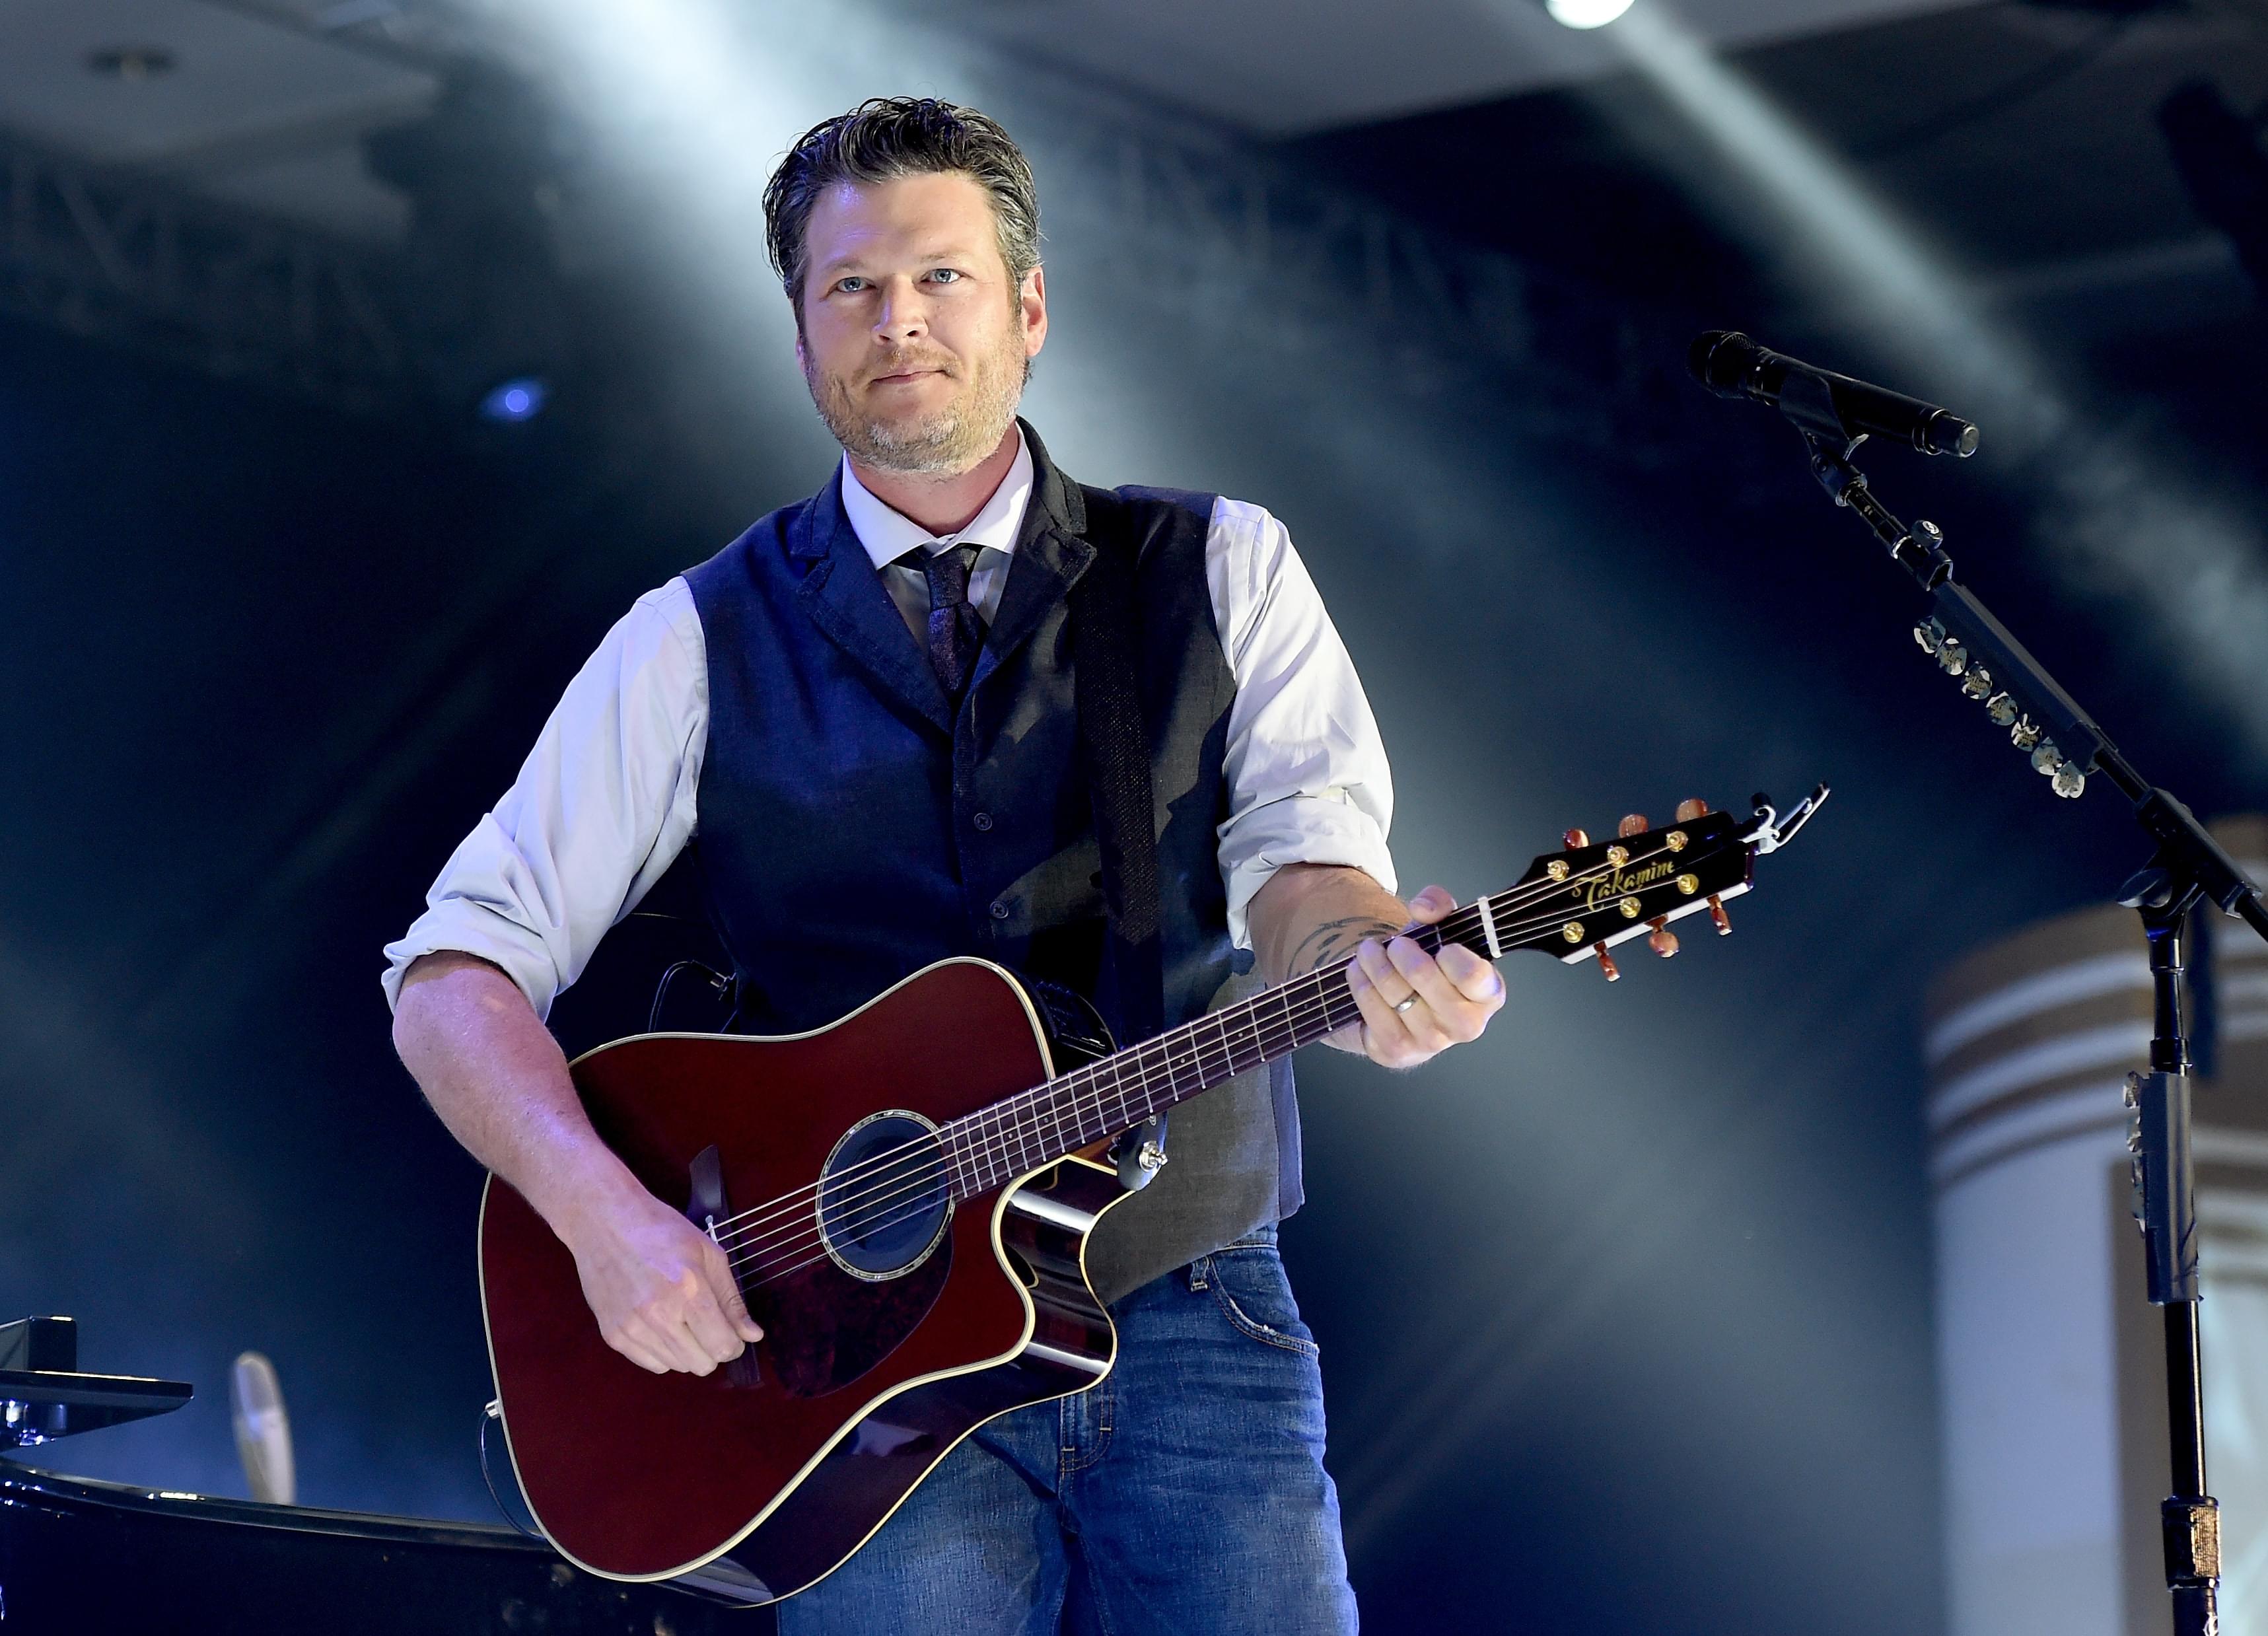 Blake Releases His Wedding Vow Song!